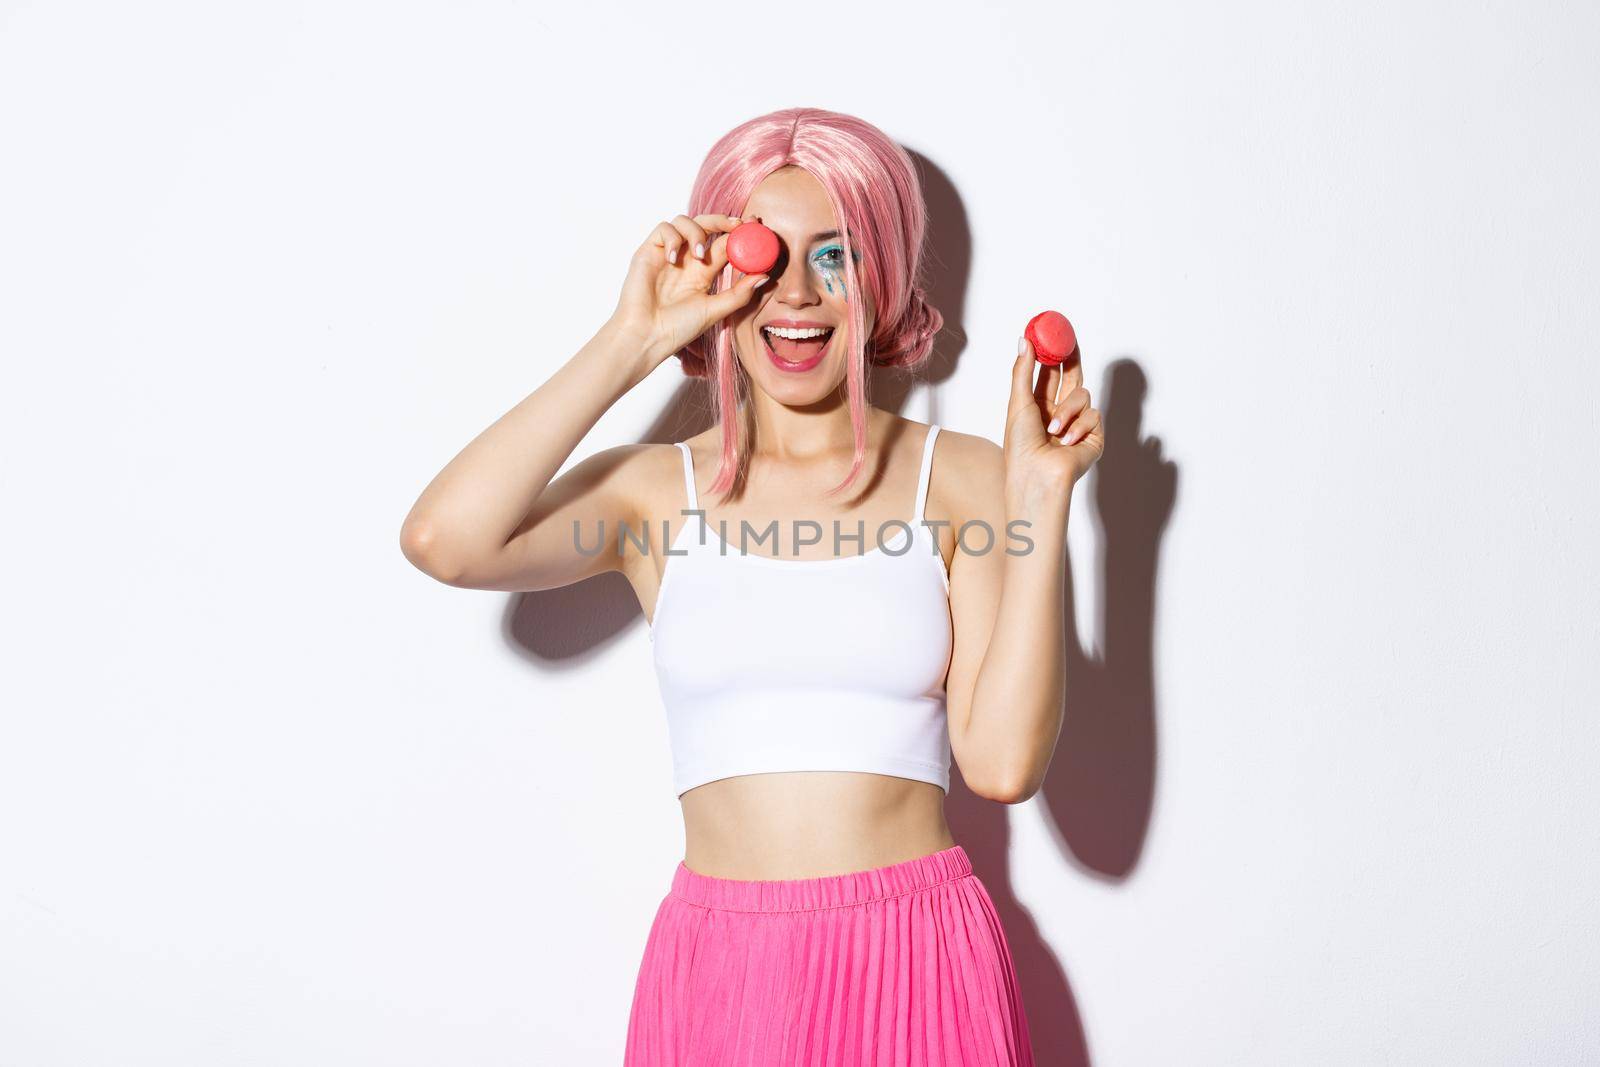 Portrait of cheerful attractive woman in pink wig, celebrating holiday, holding macaroons and smiling, standing over white background.